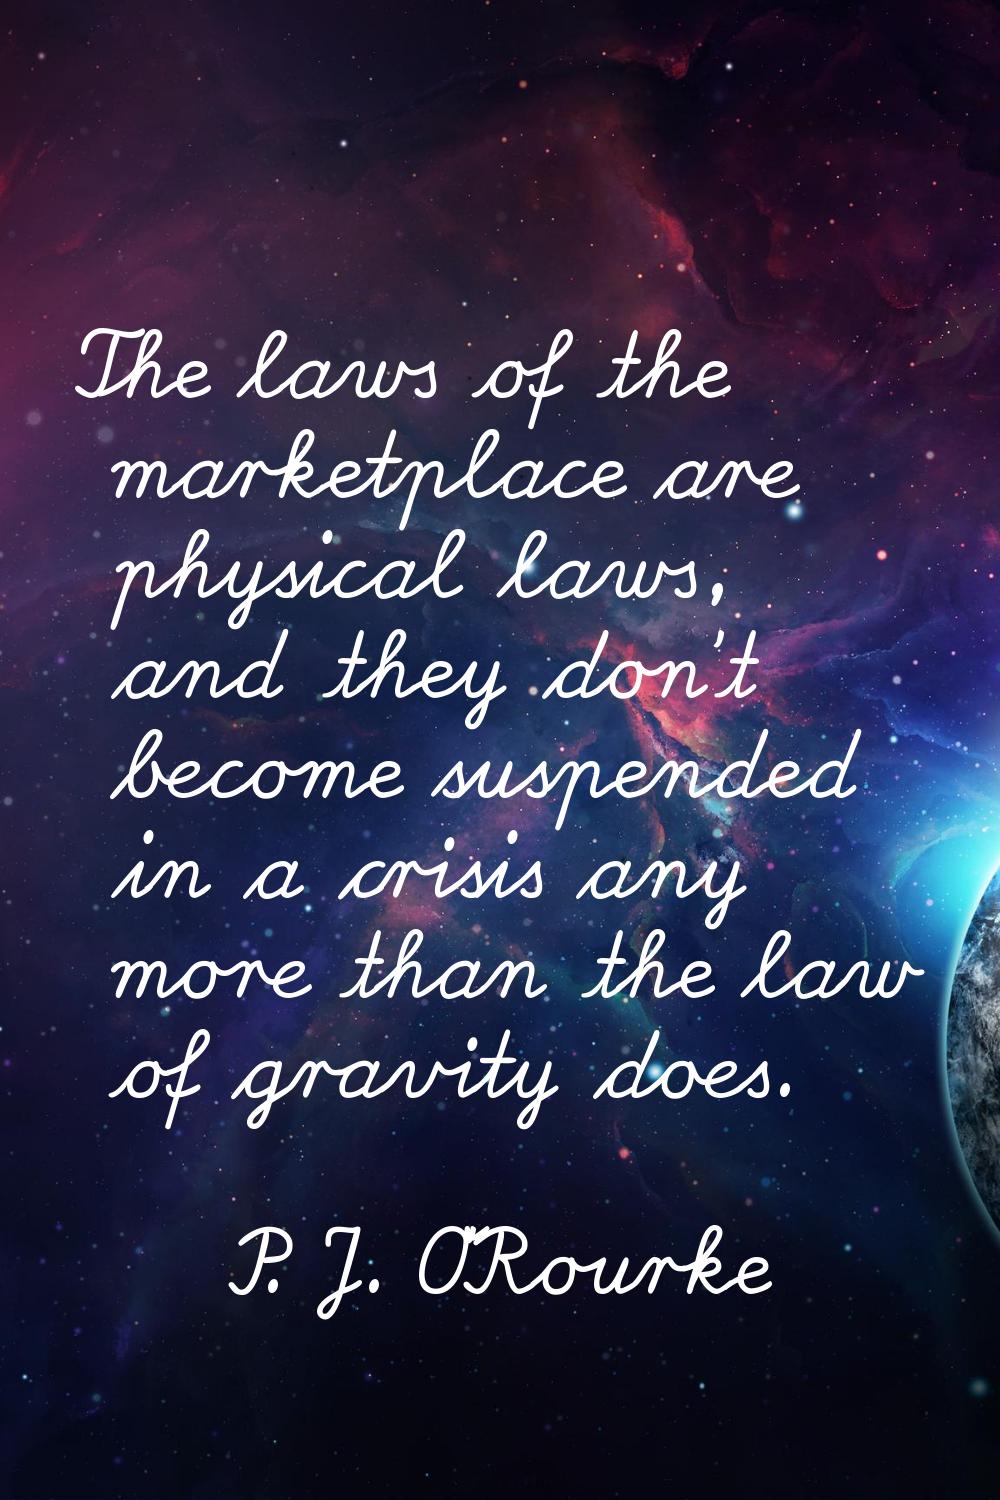 The laws of the marketplace are physical laws, and they don't become suspended in a crisis any more